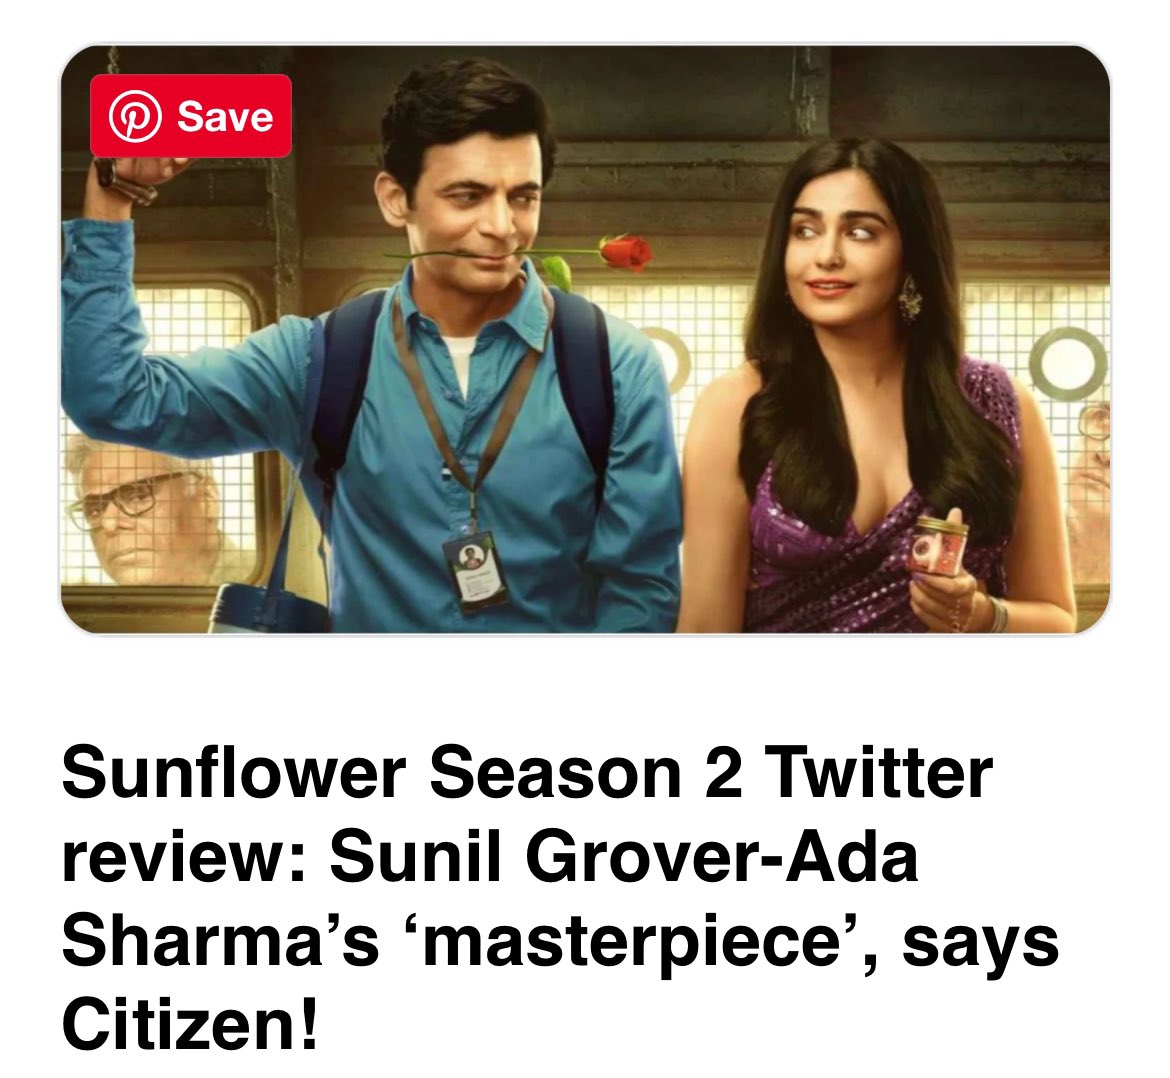 Looks like a super weekend 🌻🌻🌻
Have you watched #SunflowerS2 yet?